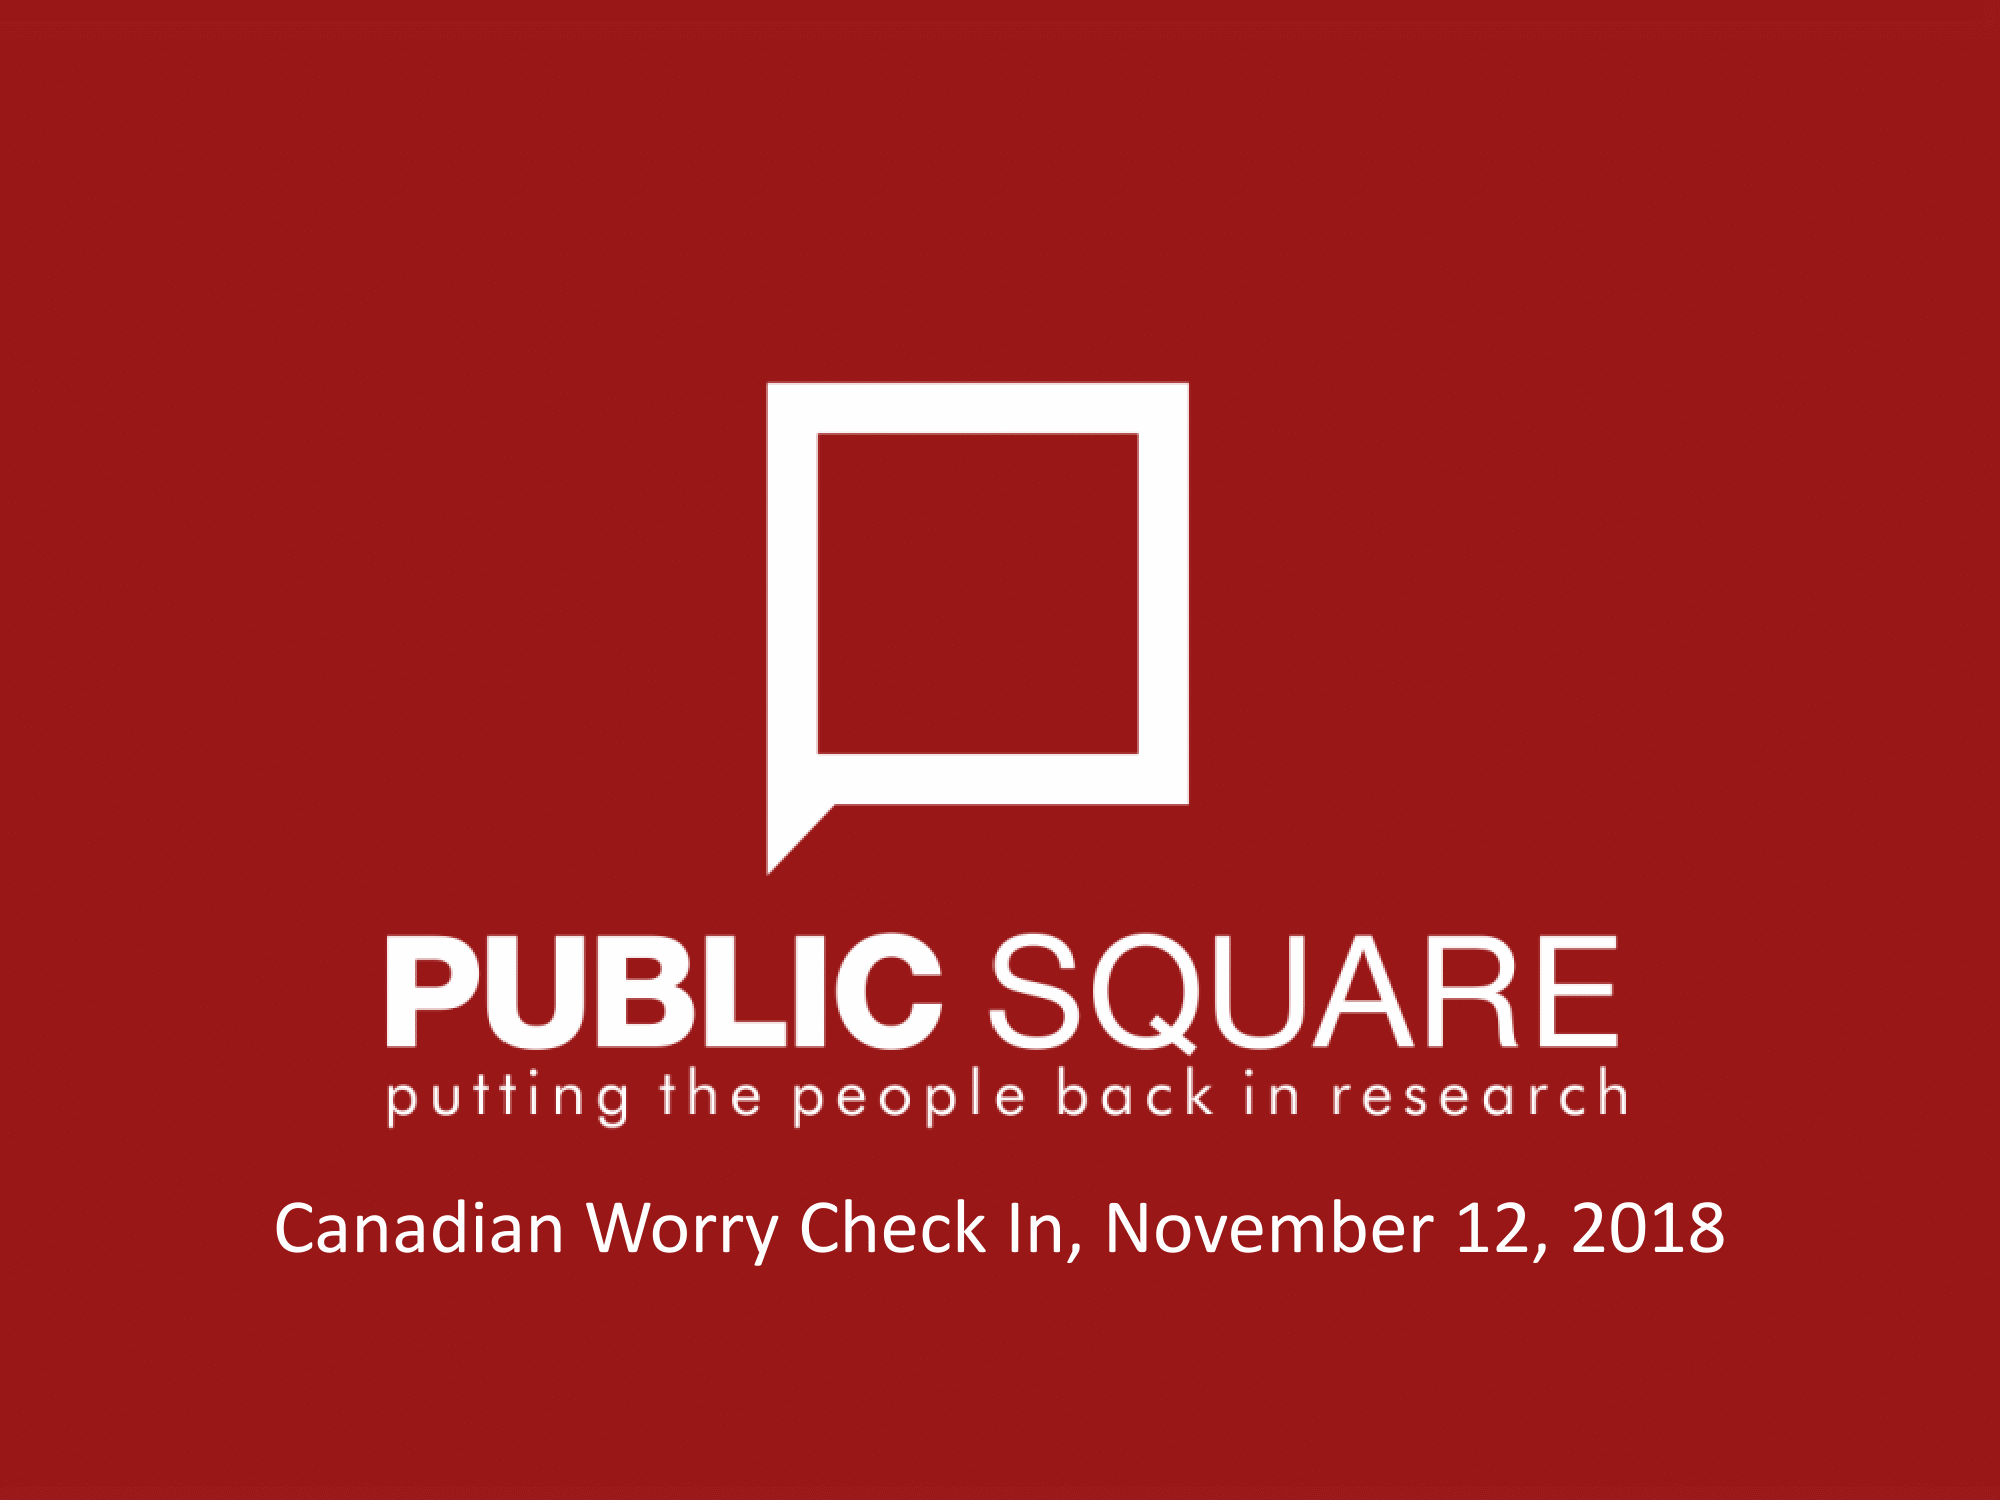 Canadian Worry Check In Report